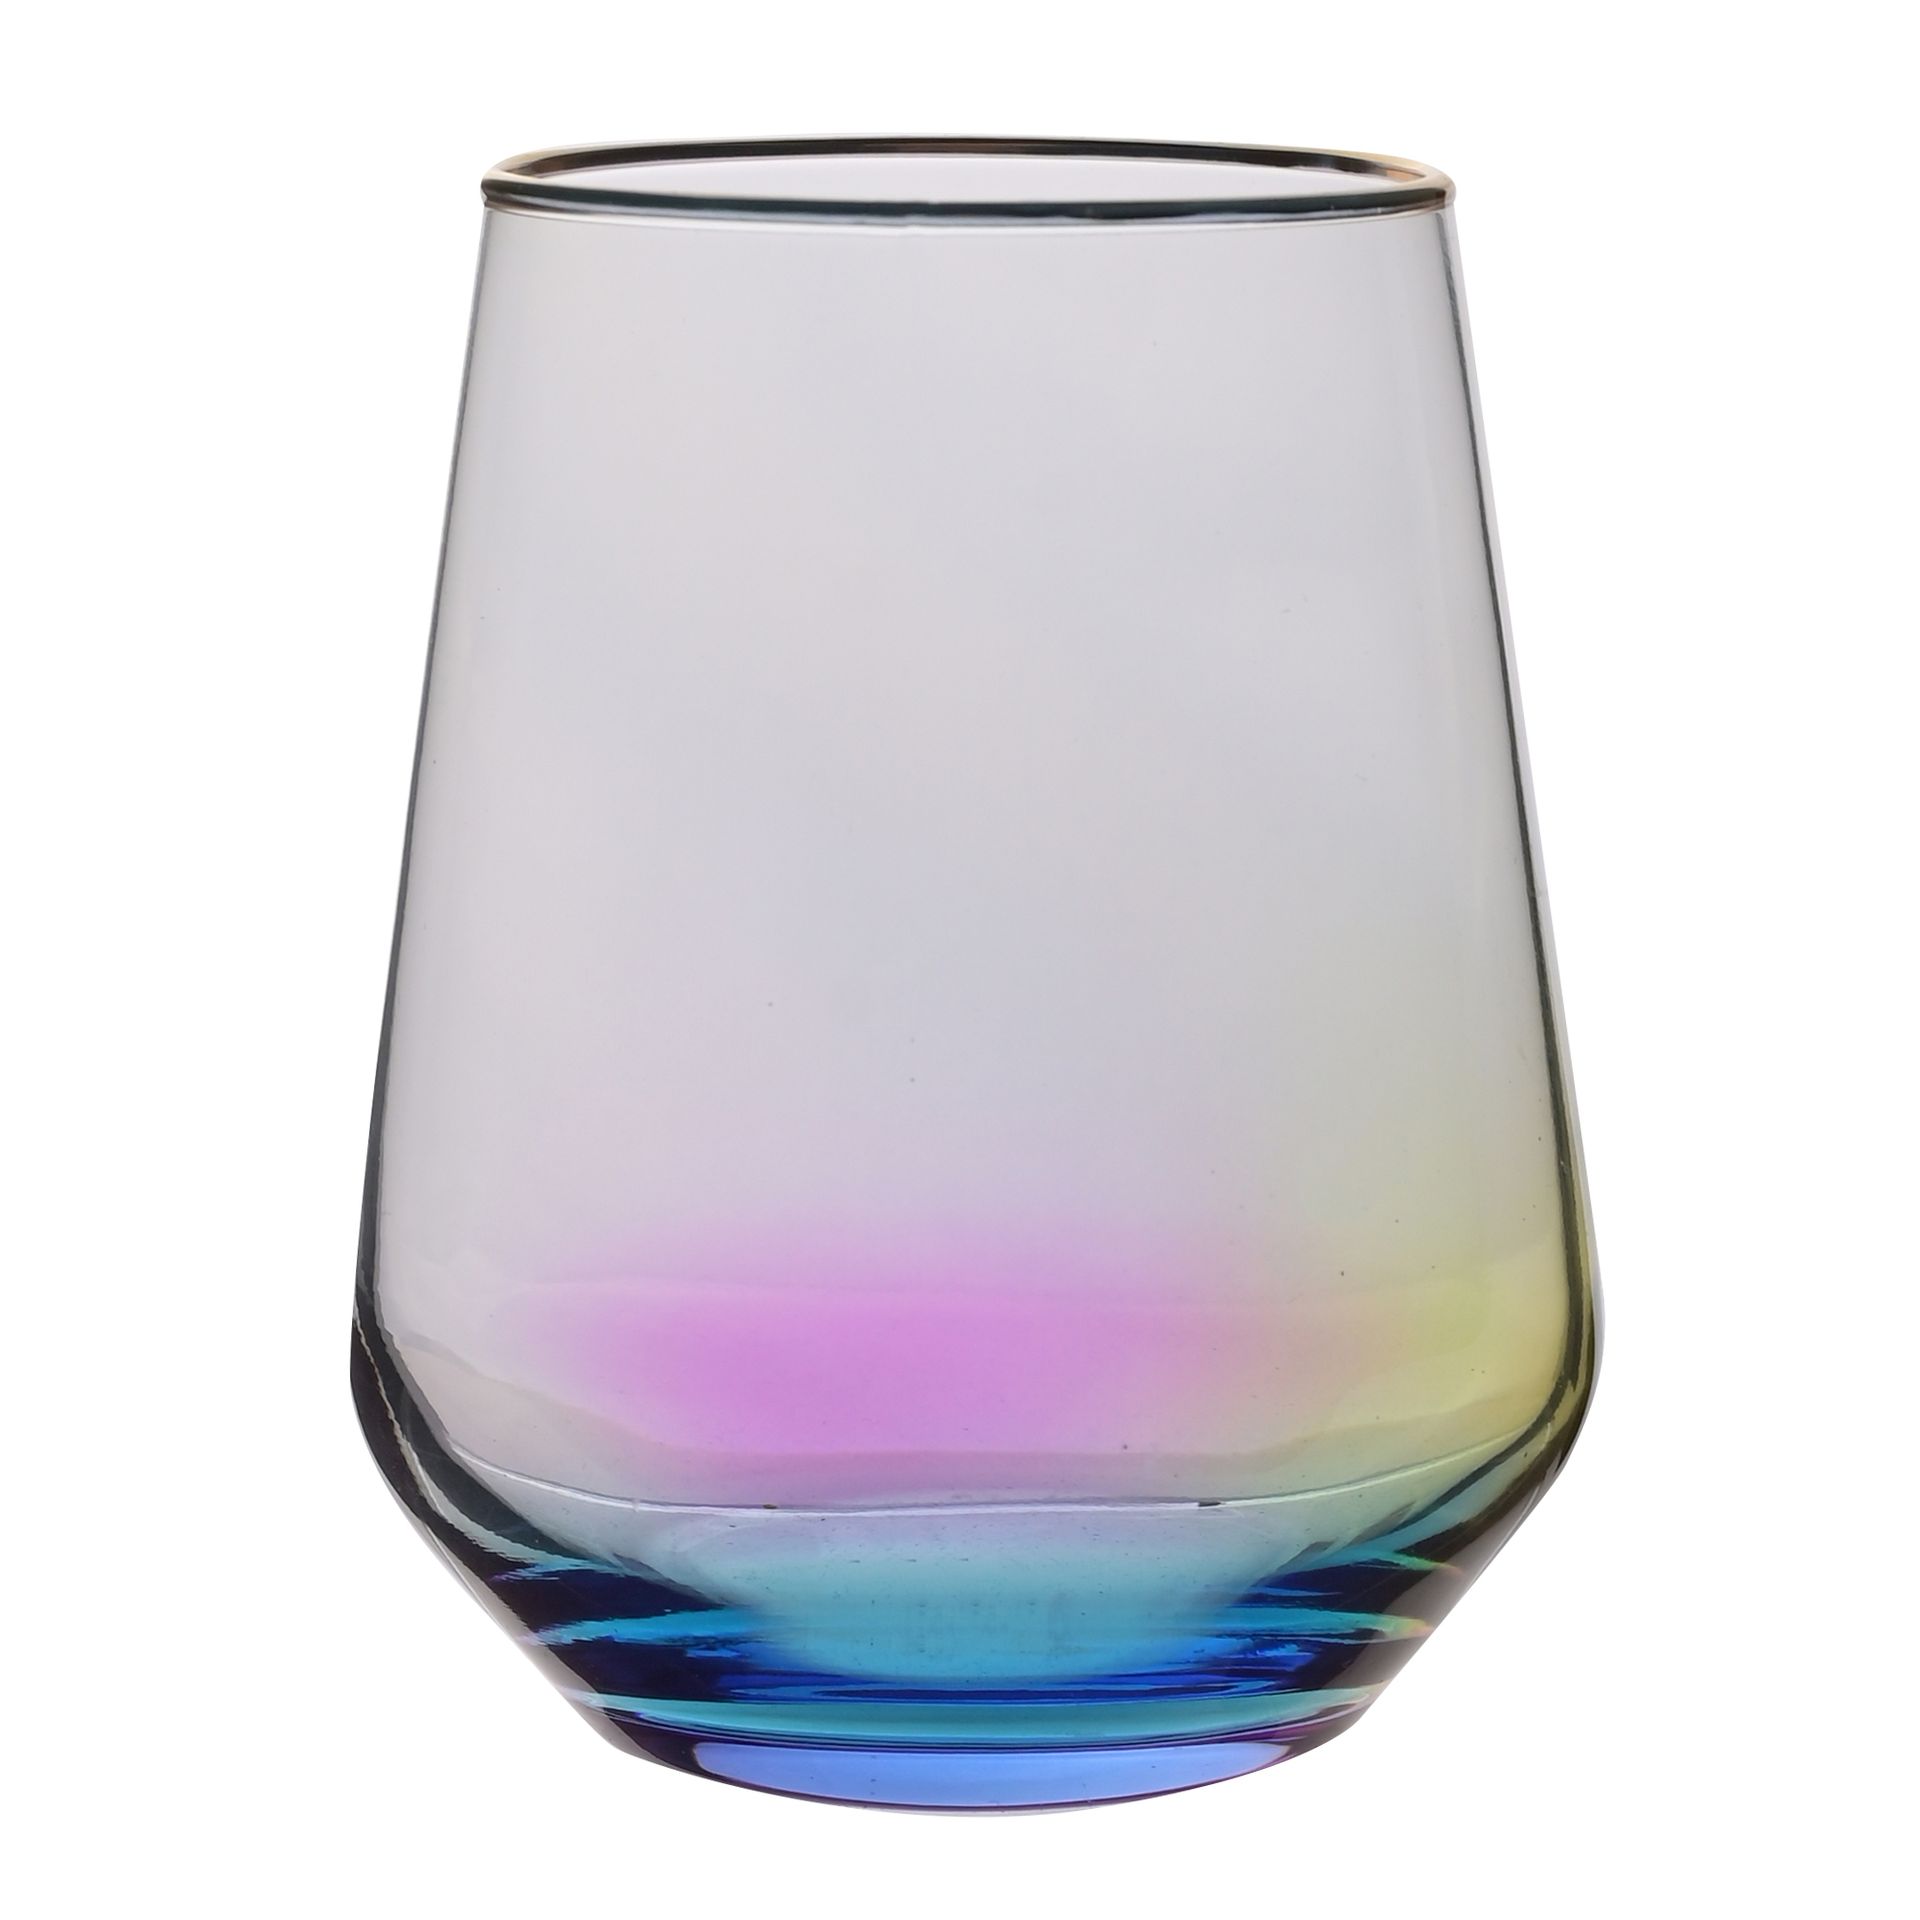 &Quirky Rainbow Tumbler Glass